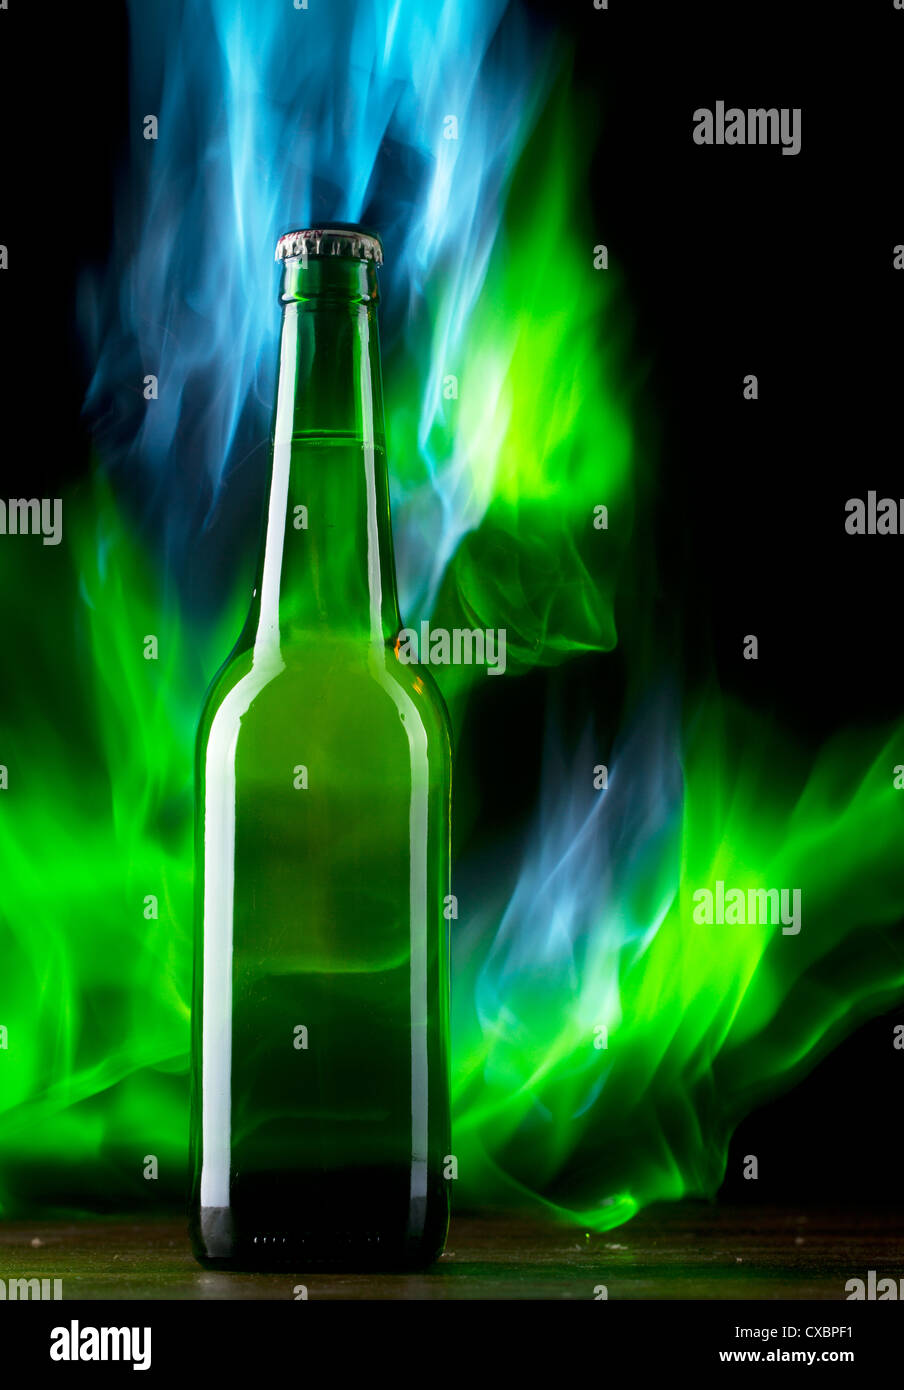 Beer bottle with color fire Stock Photo